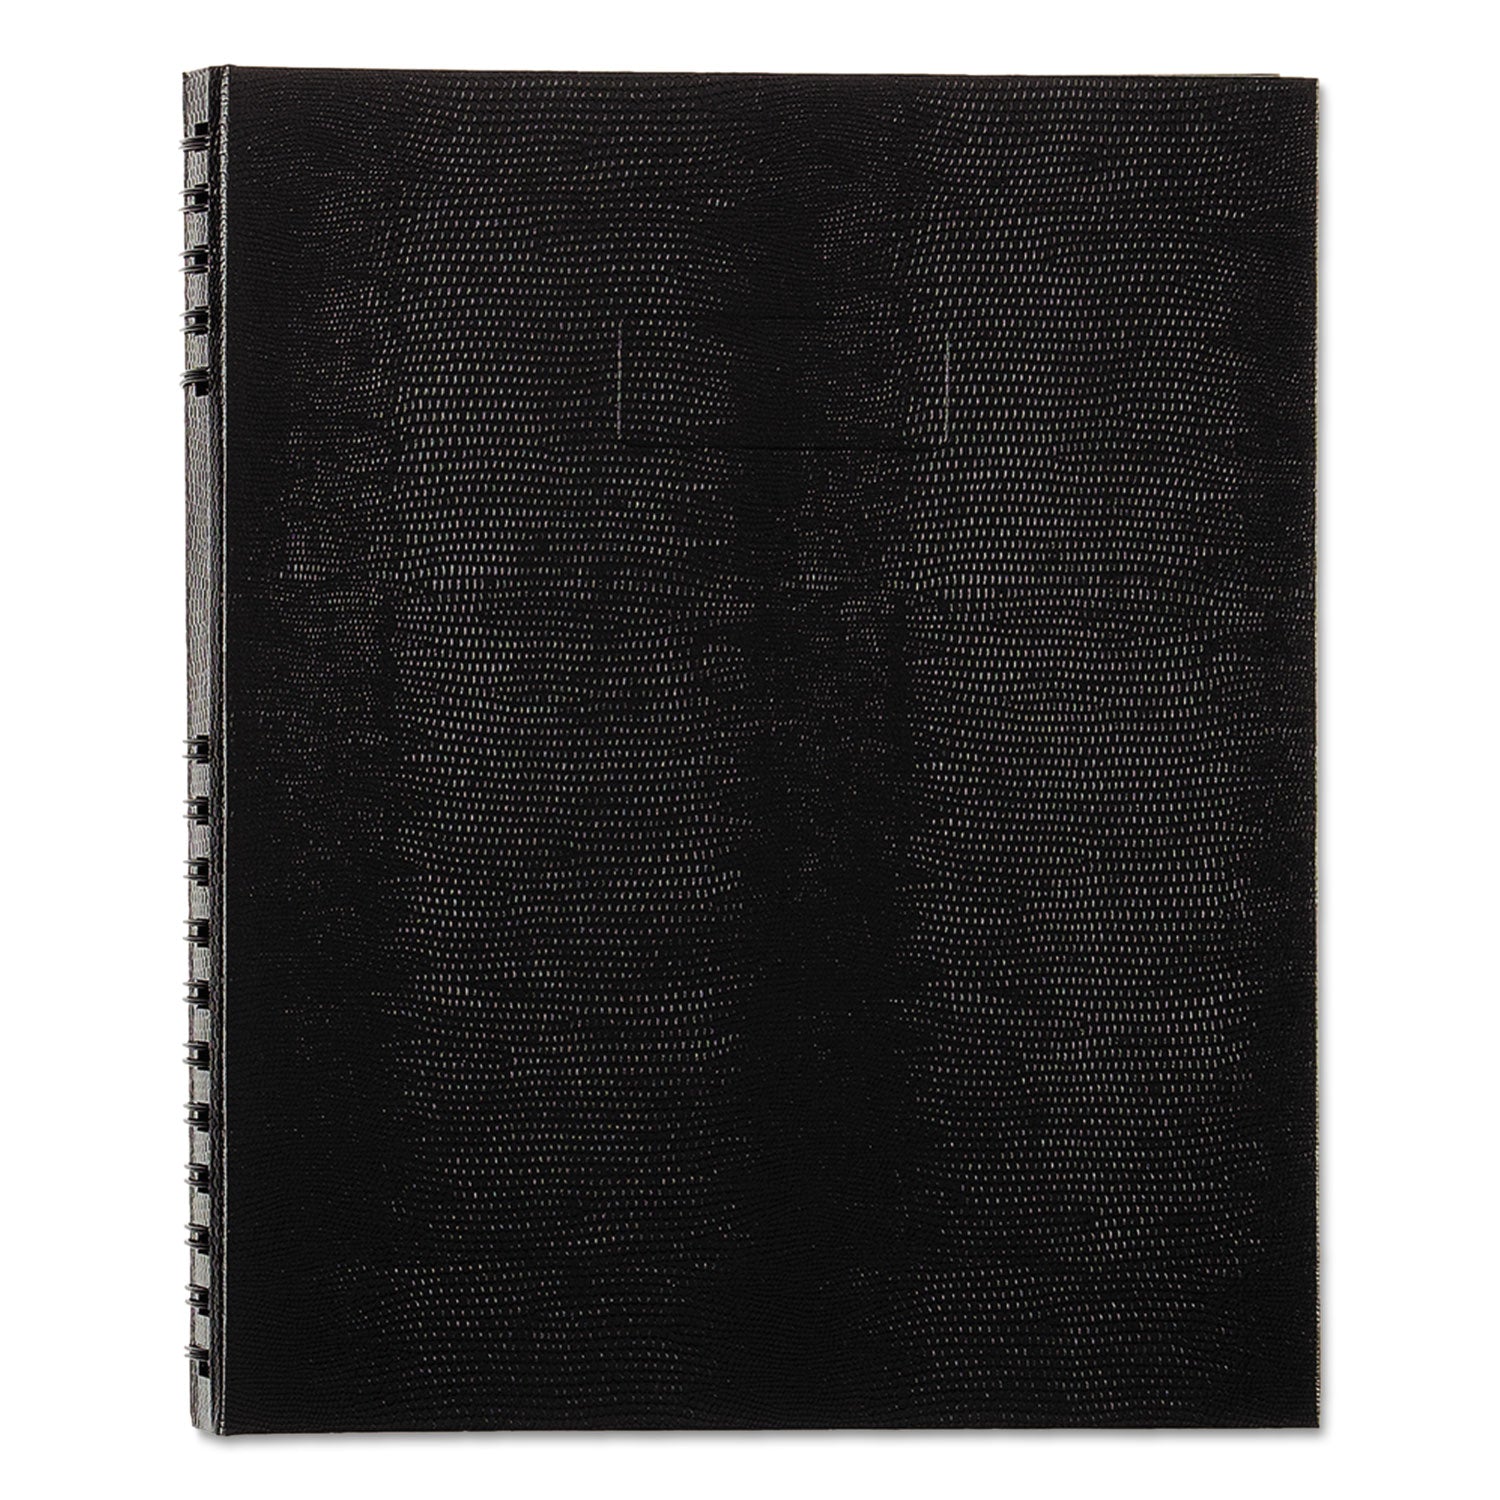 NotePro Notebook, 1-Subject, Medium/College Rule, Black Cover, (150) 11 x 8.5 Sheets - 